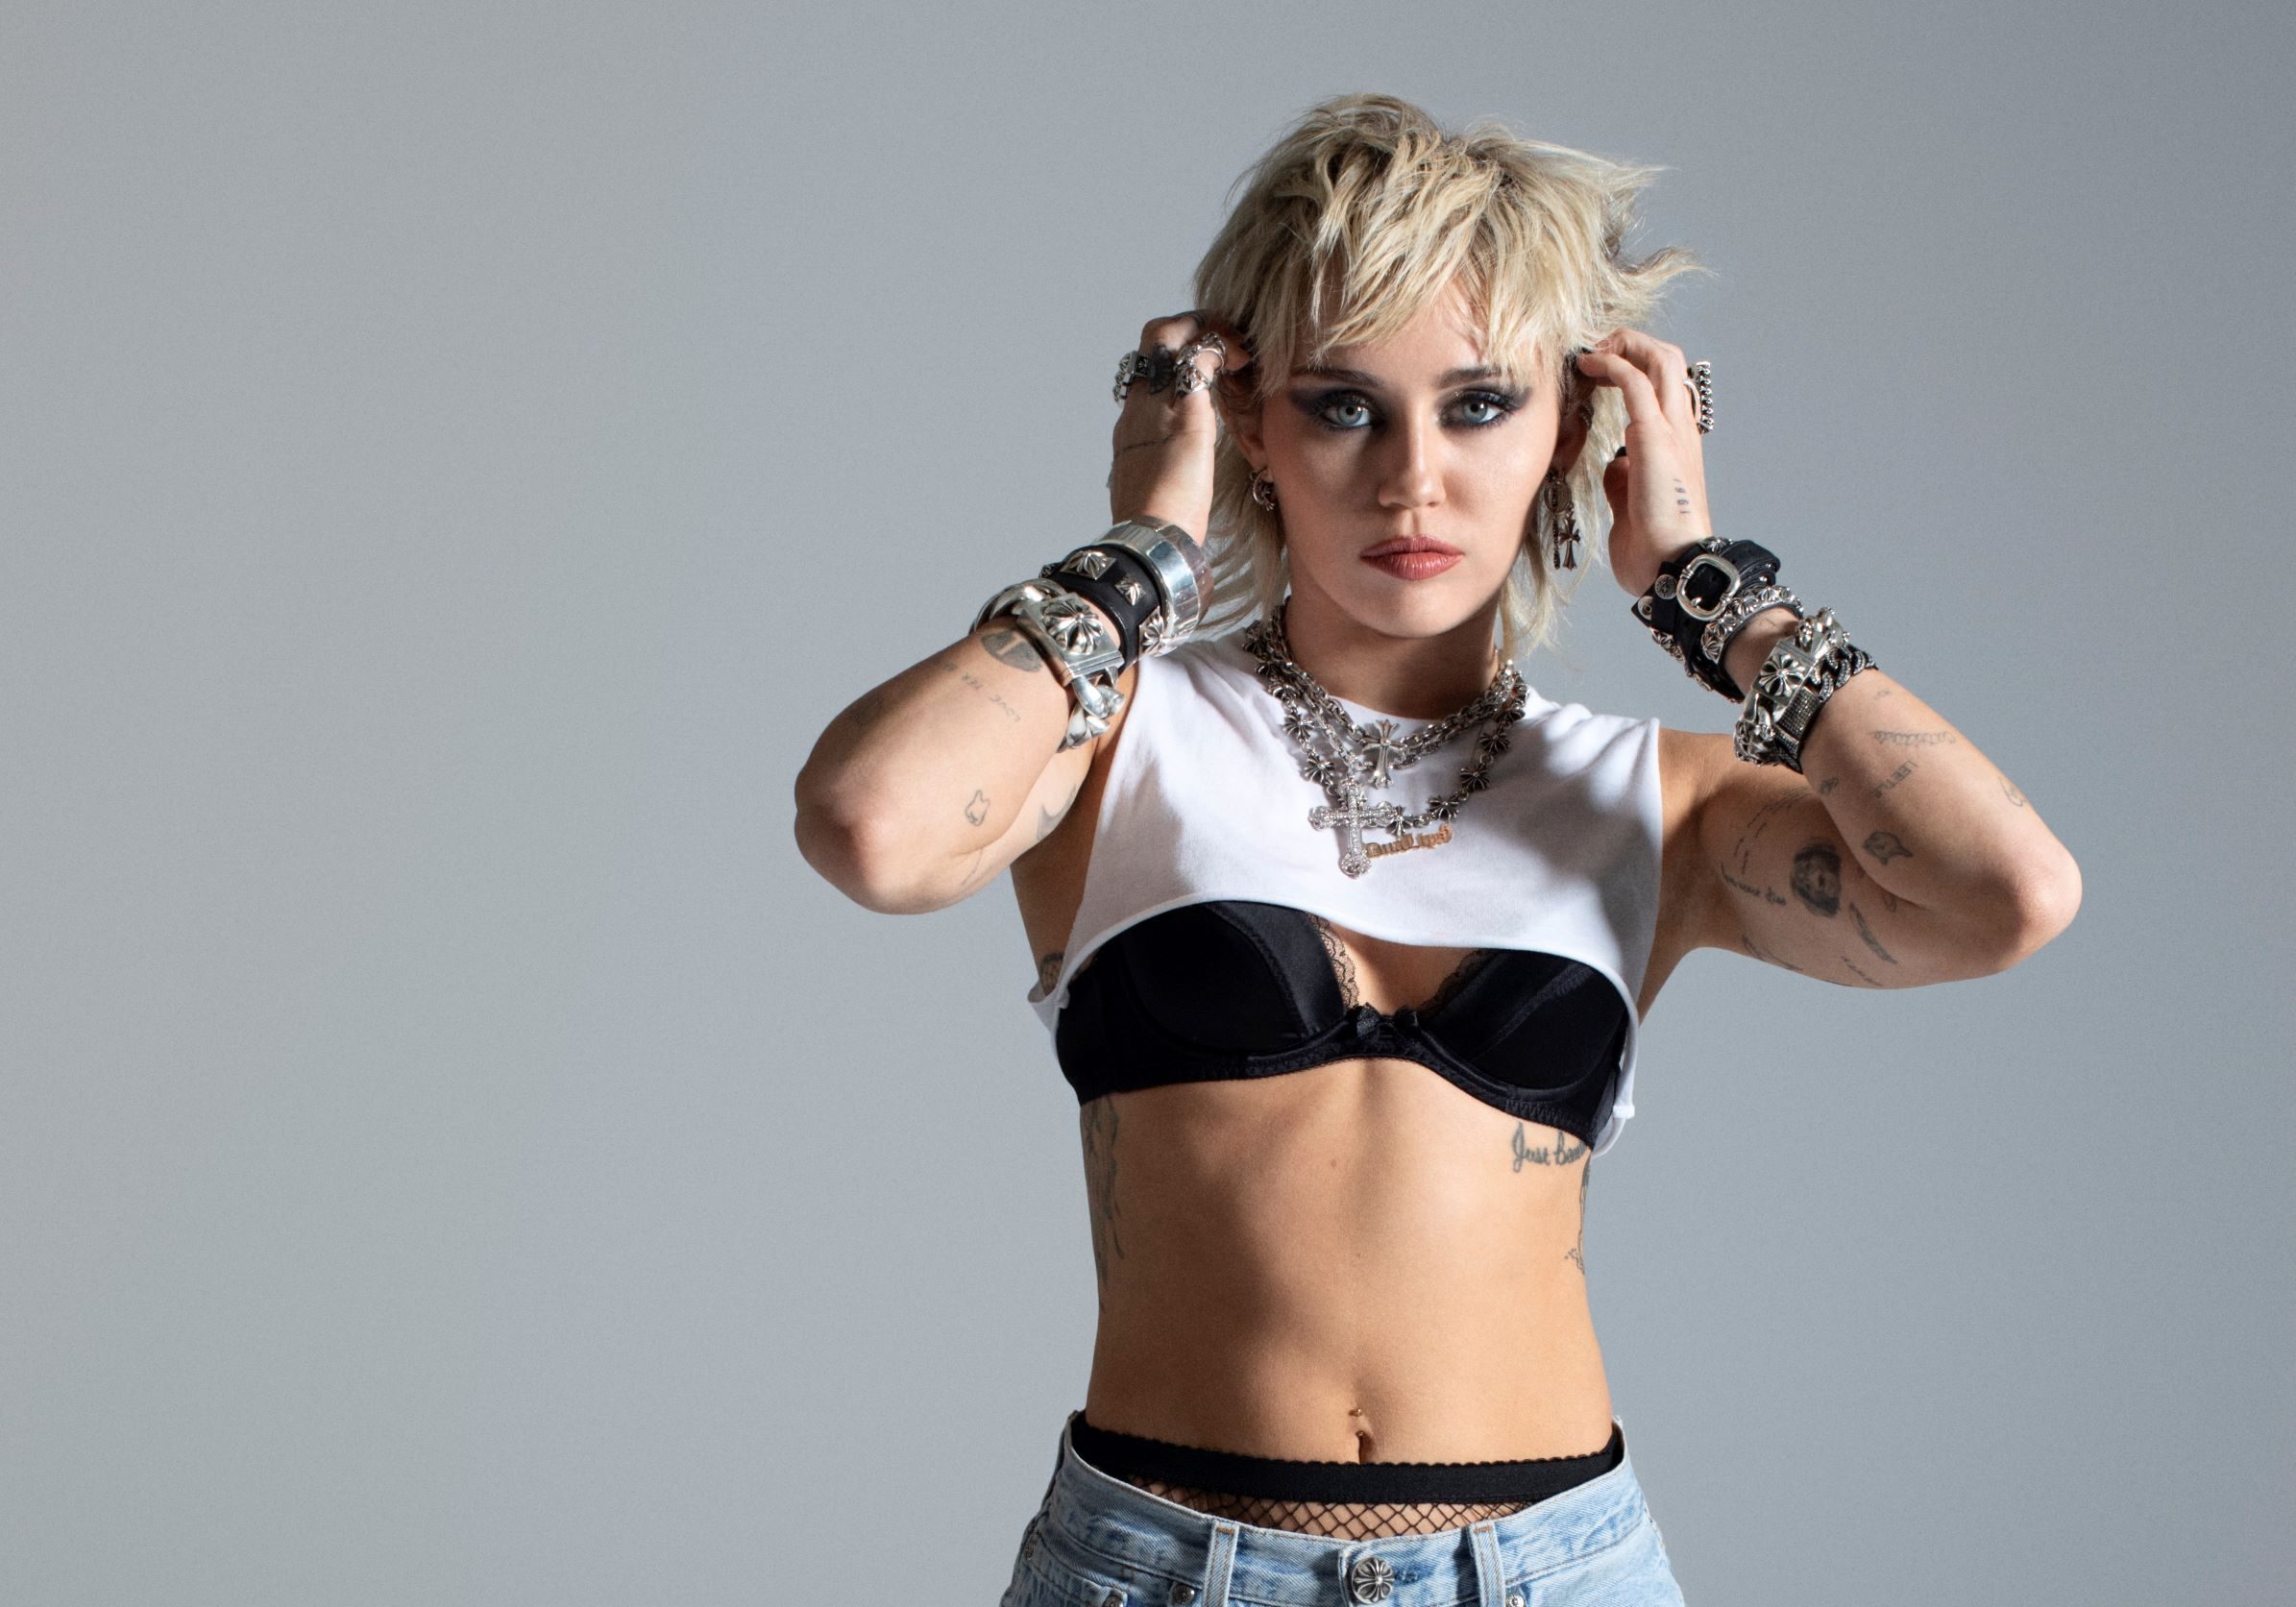 LISTEN: Miley Cyrus goes old school rock ‘n’ roll with ‘Plastic Hearts’